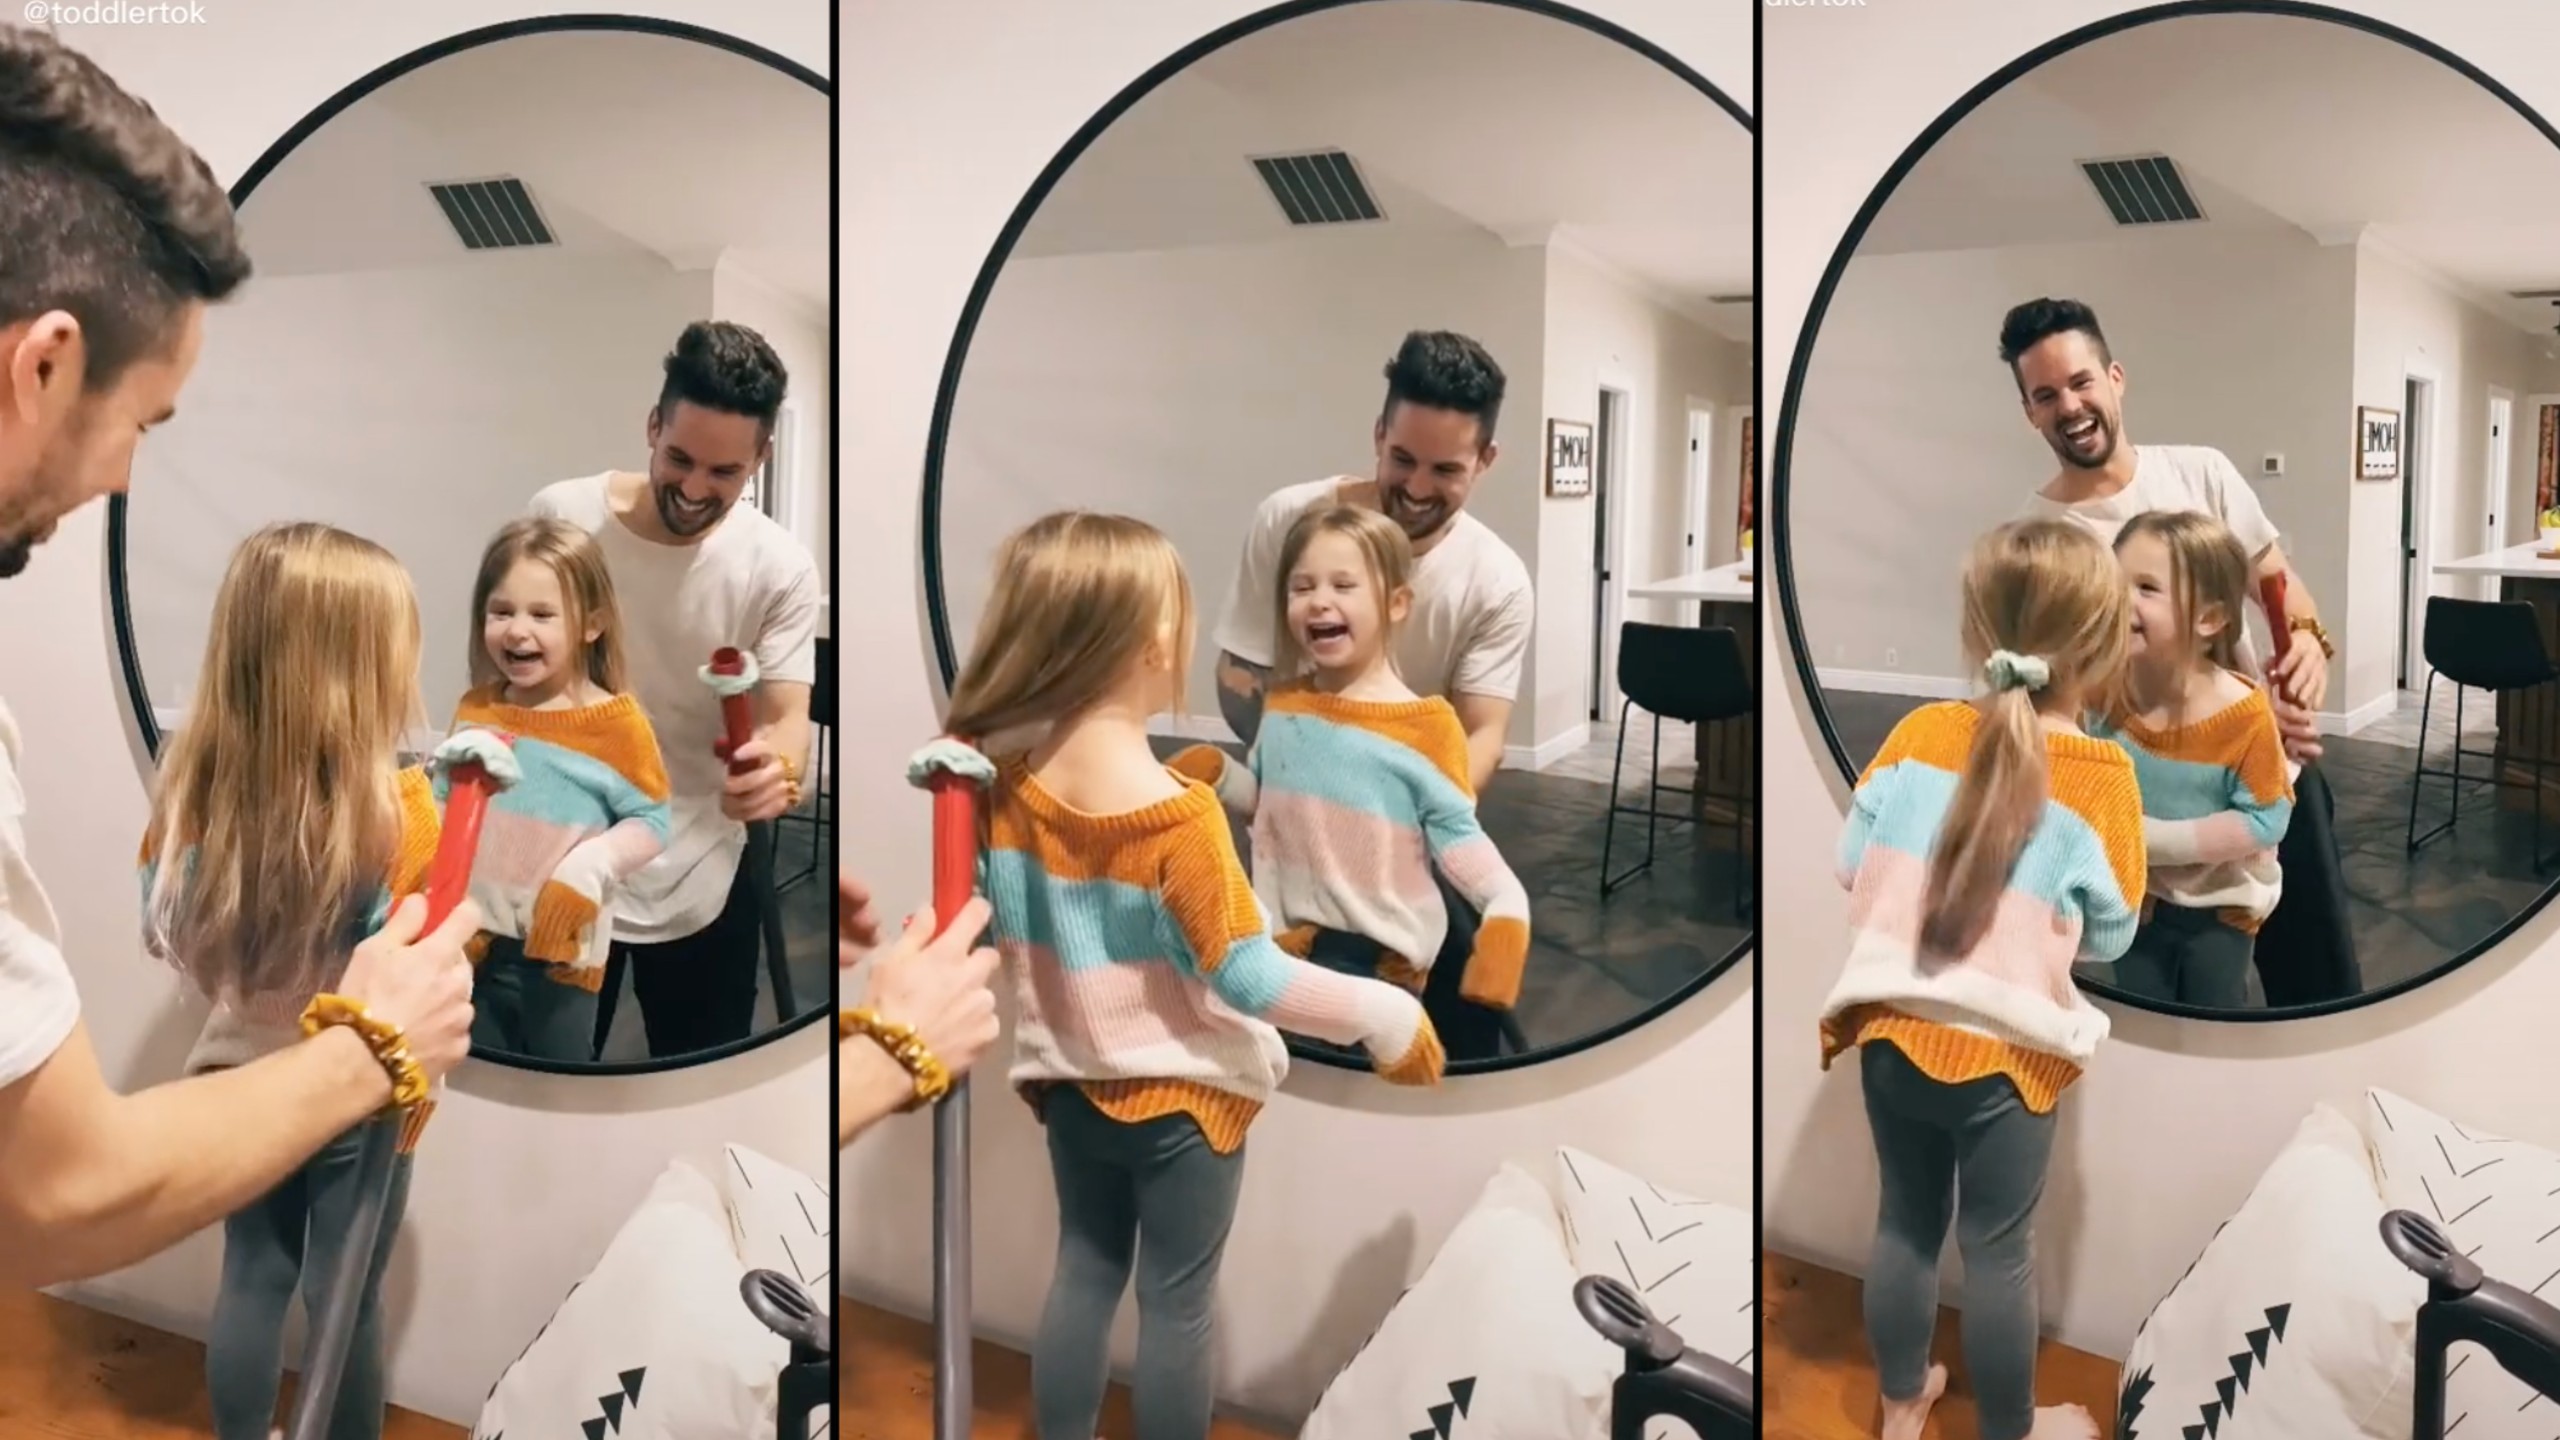 Dad hilariously uses vacuum to style daughter's hair